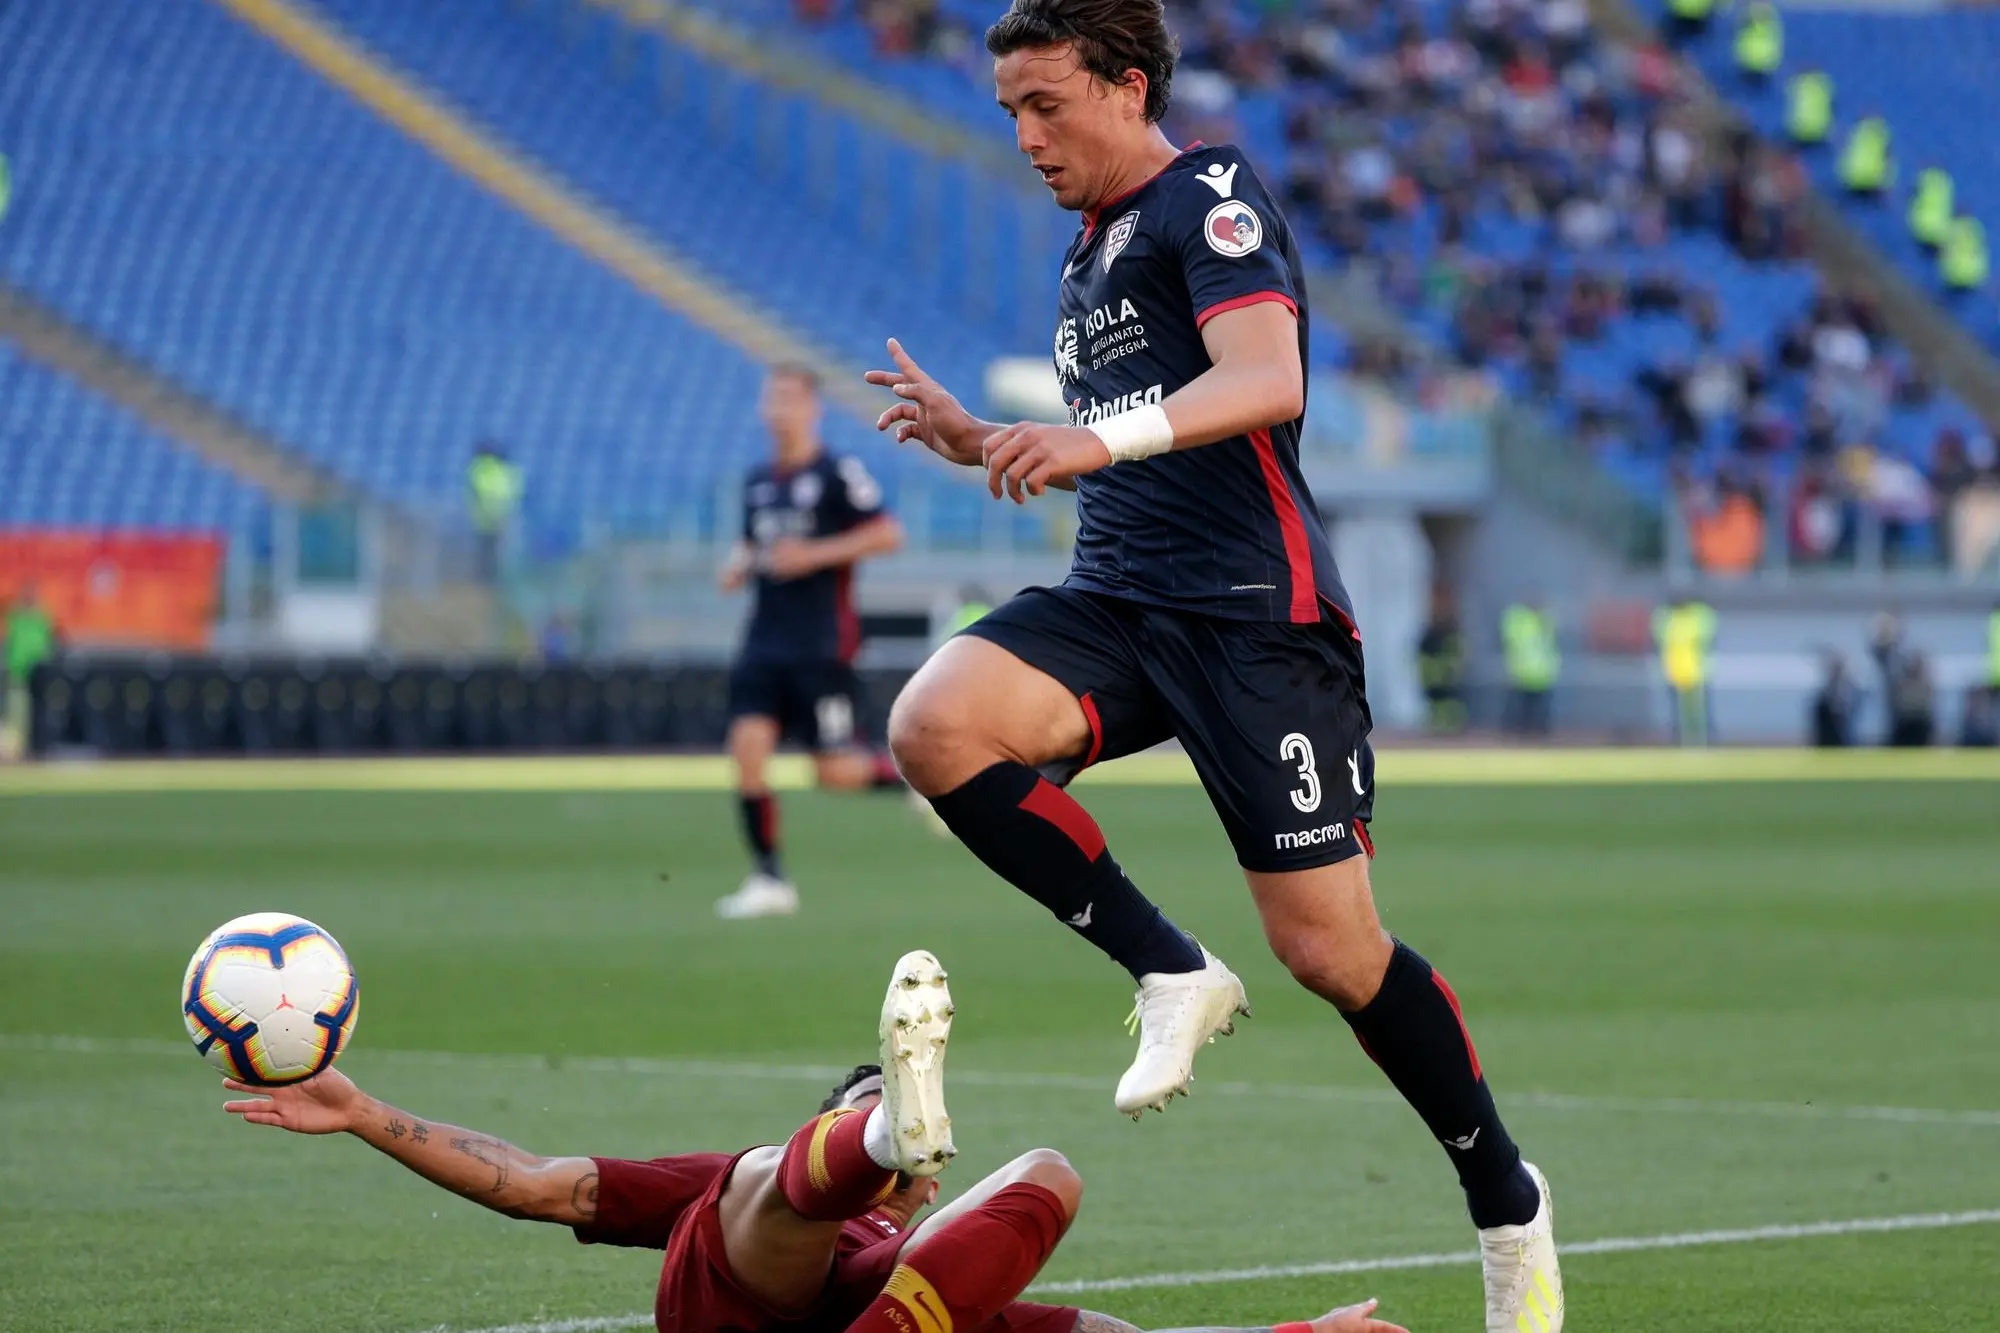 Roma's Justin Kluivert, on the ground, and Cagliari's Luca Pellegrini fight for the ball during a Serie A soccer match between Roma and Cagliari, at Rome's Olympic Stadium, Saturday, April 27, 2019. (AP Photo/Gregorio Borgia)